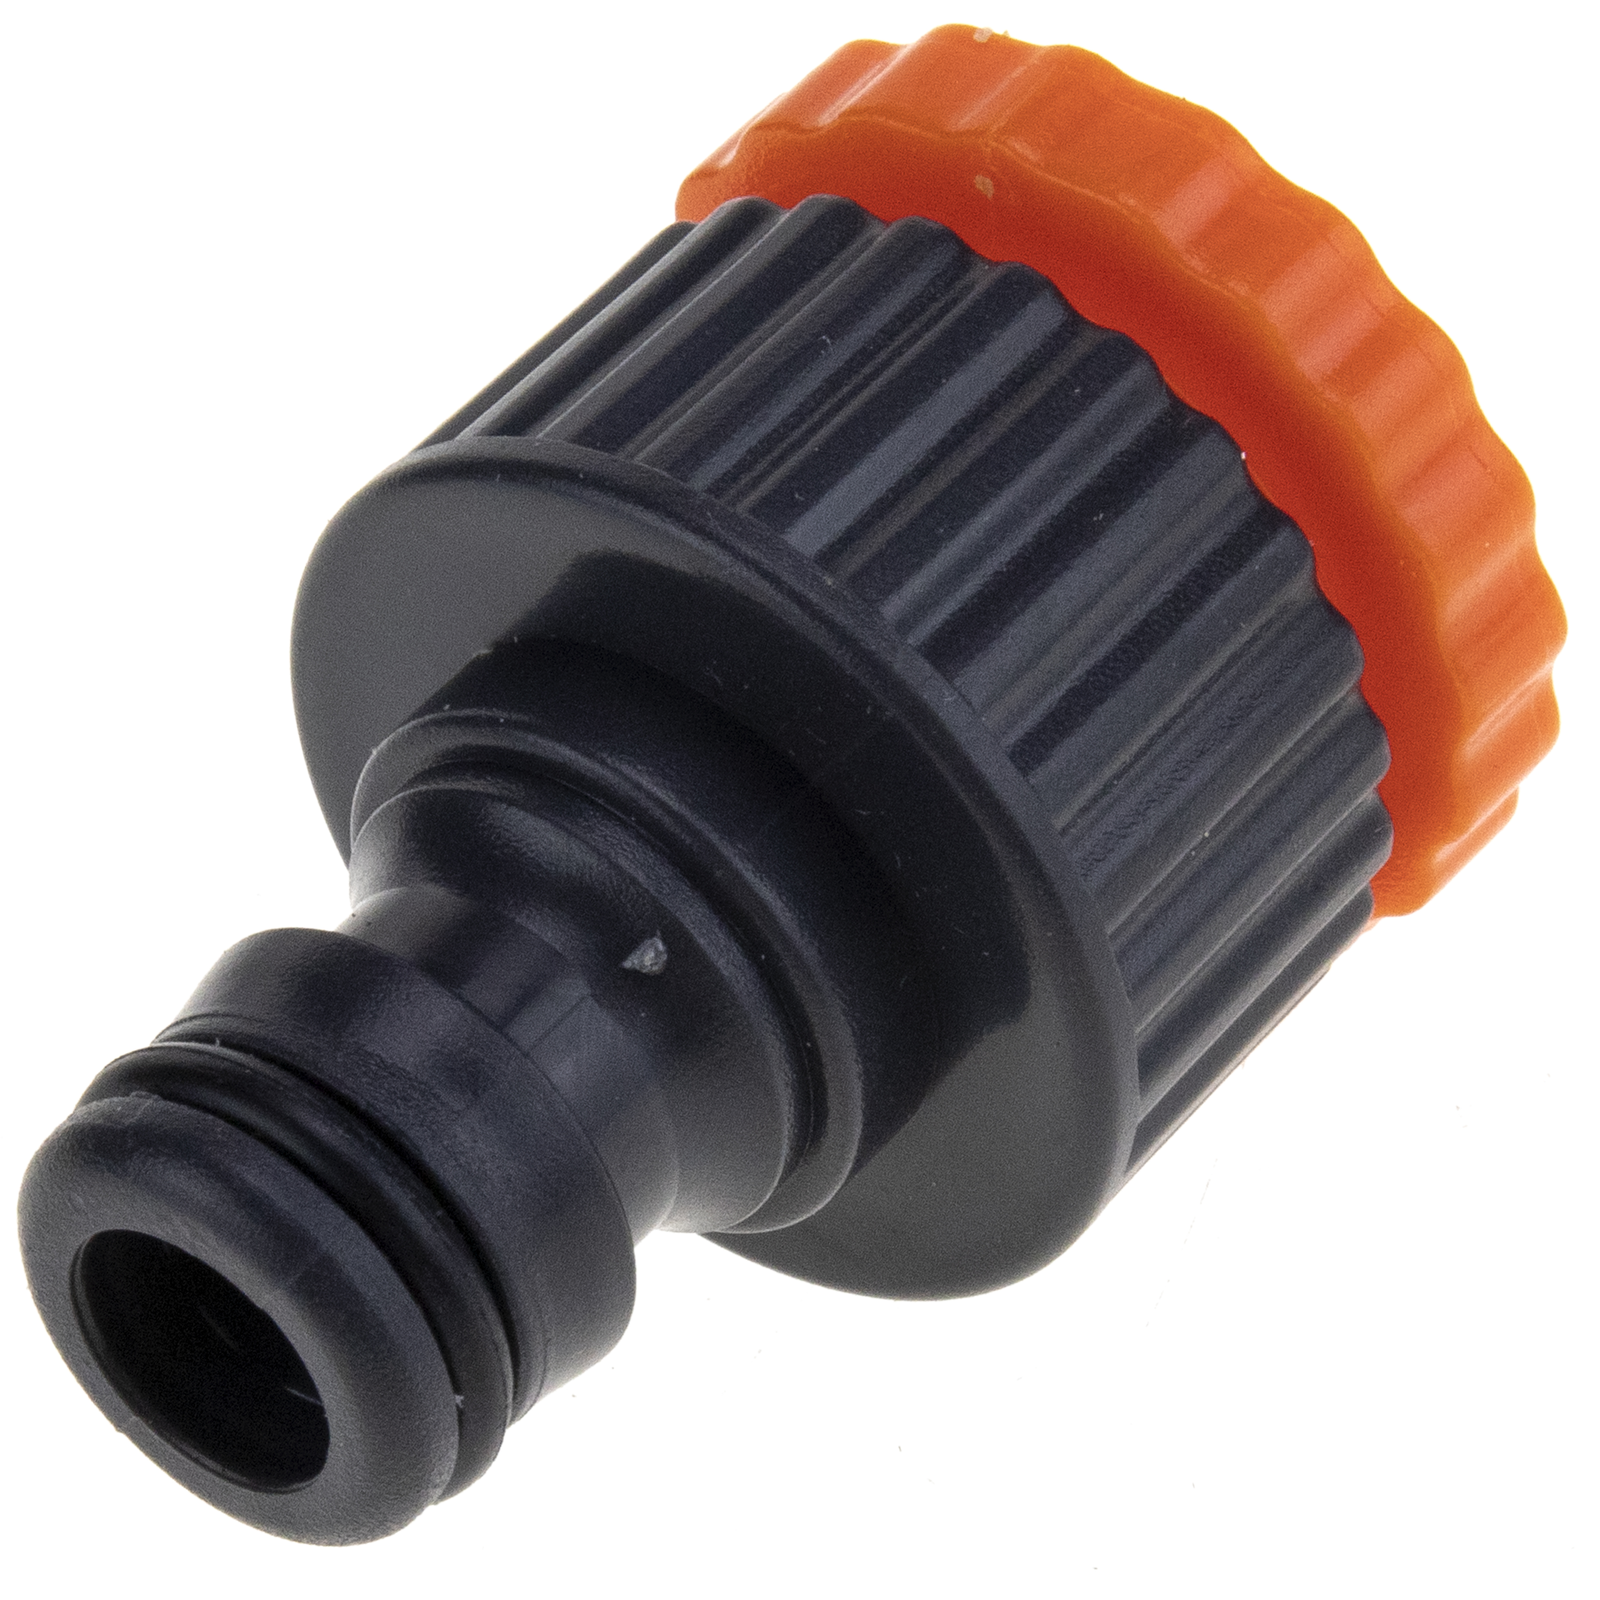 NITO WATER QUICK RELEASE CONNECTOR MALE FEMALE INLET 1/2 F x 1/2-3/4 HOSETAIL 